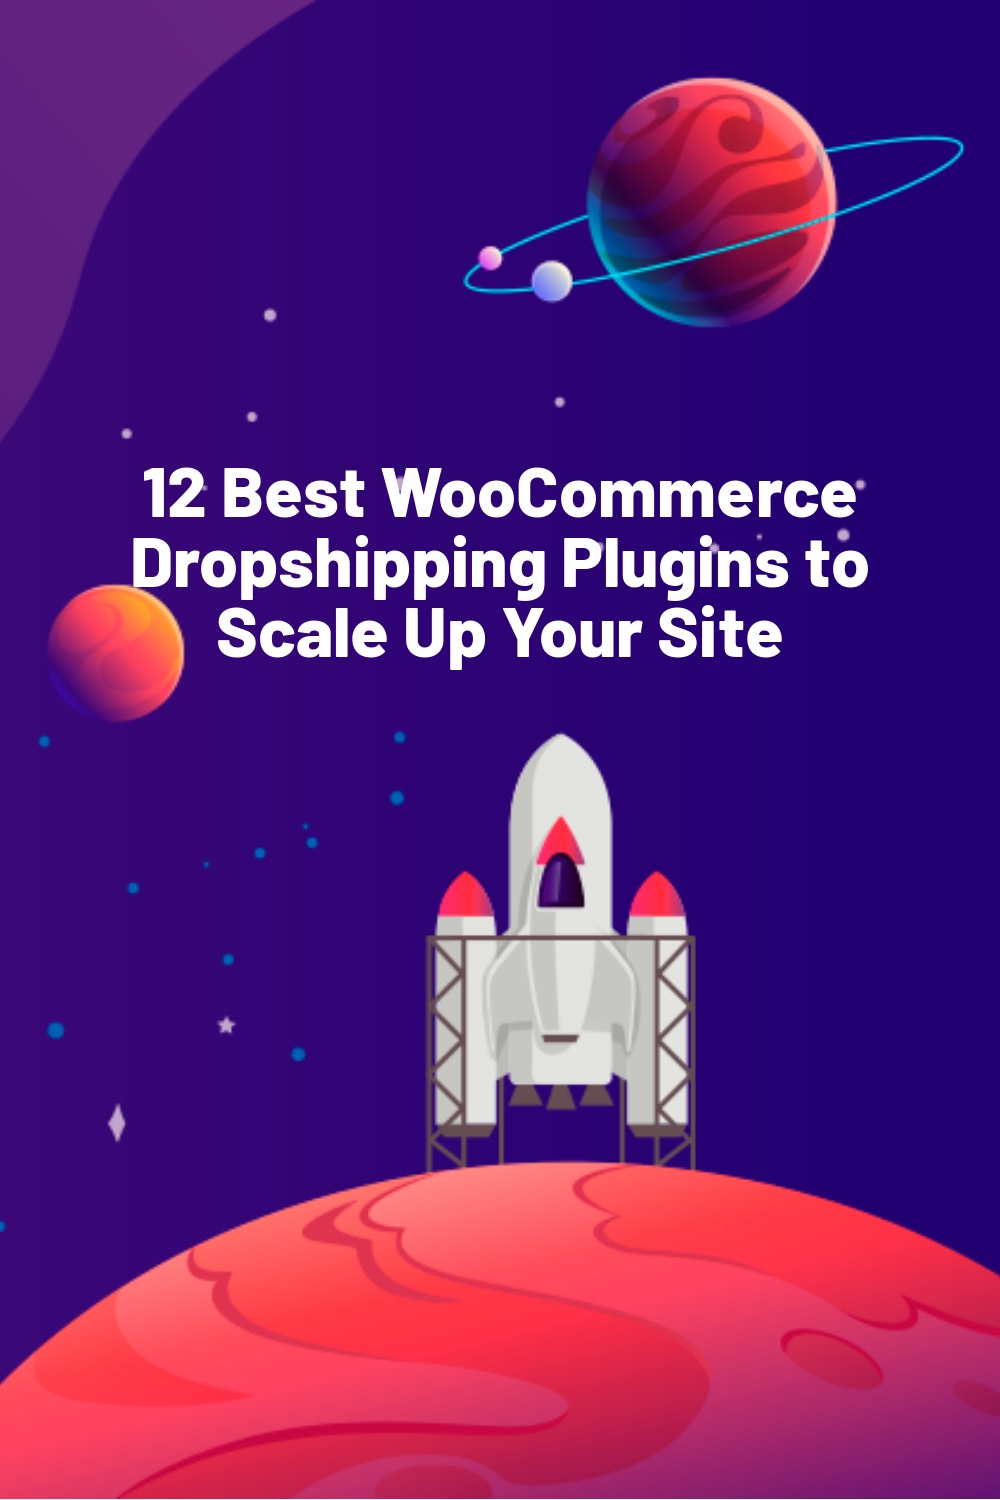 12 Best WooCommerce Dropshipping Plugins to Scale Up Your Site